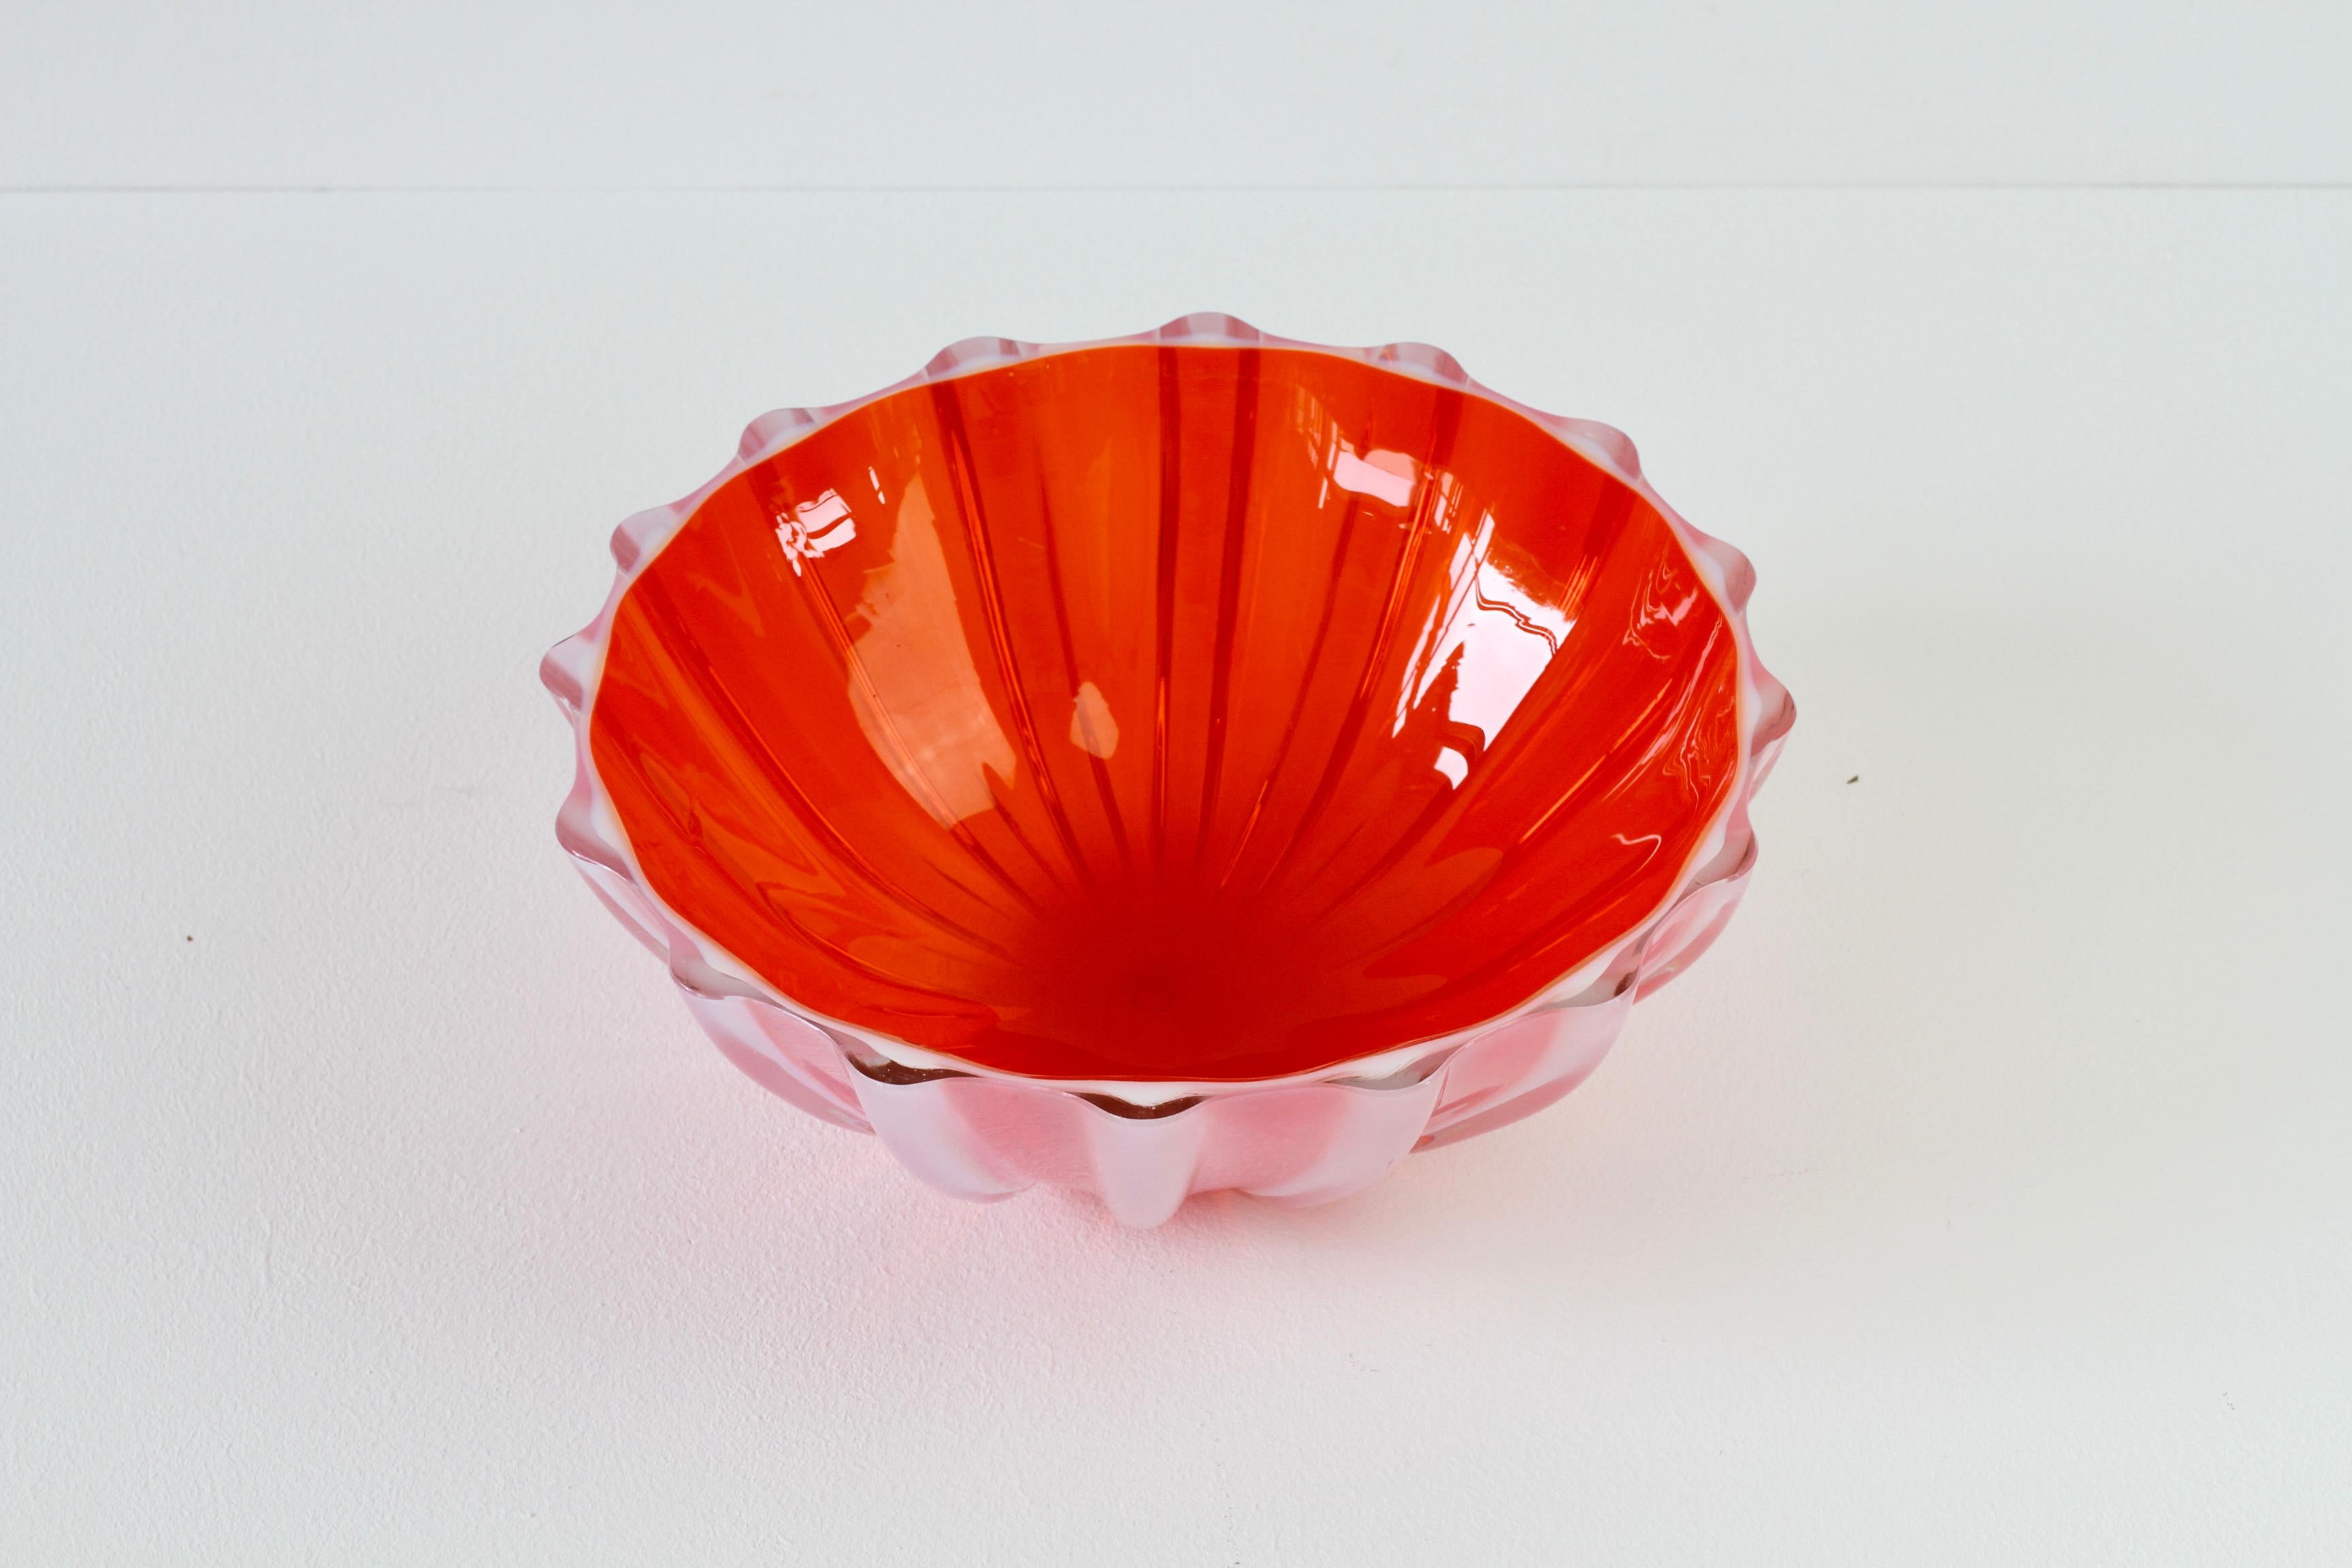 Seguso Vetri d'Arte large vintage murano glass fruit bowl. This is a magical piece of murano glass - measuring a large 28.5cms / 11 inches in diameter and displaying some exquisite Italian glass techniques. Captured in an electrifying sapphire red